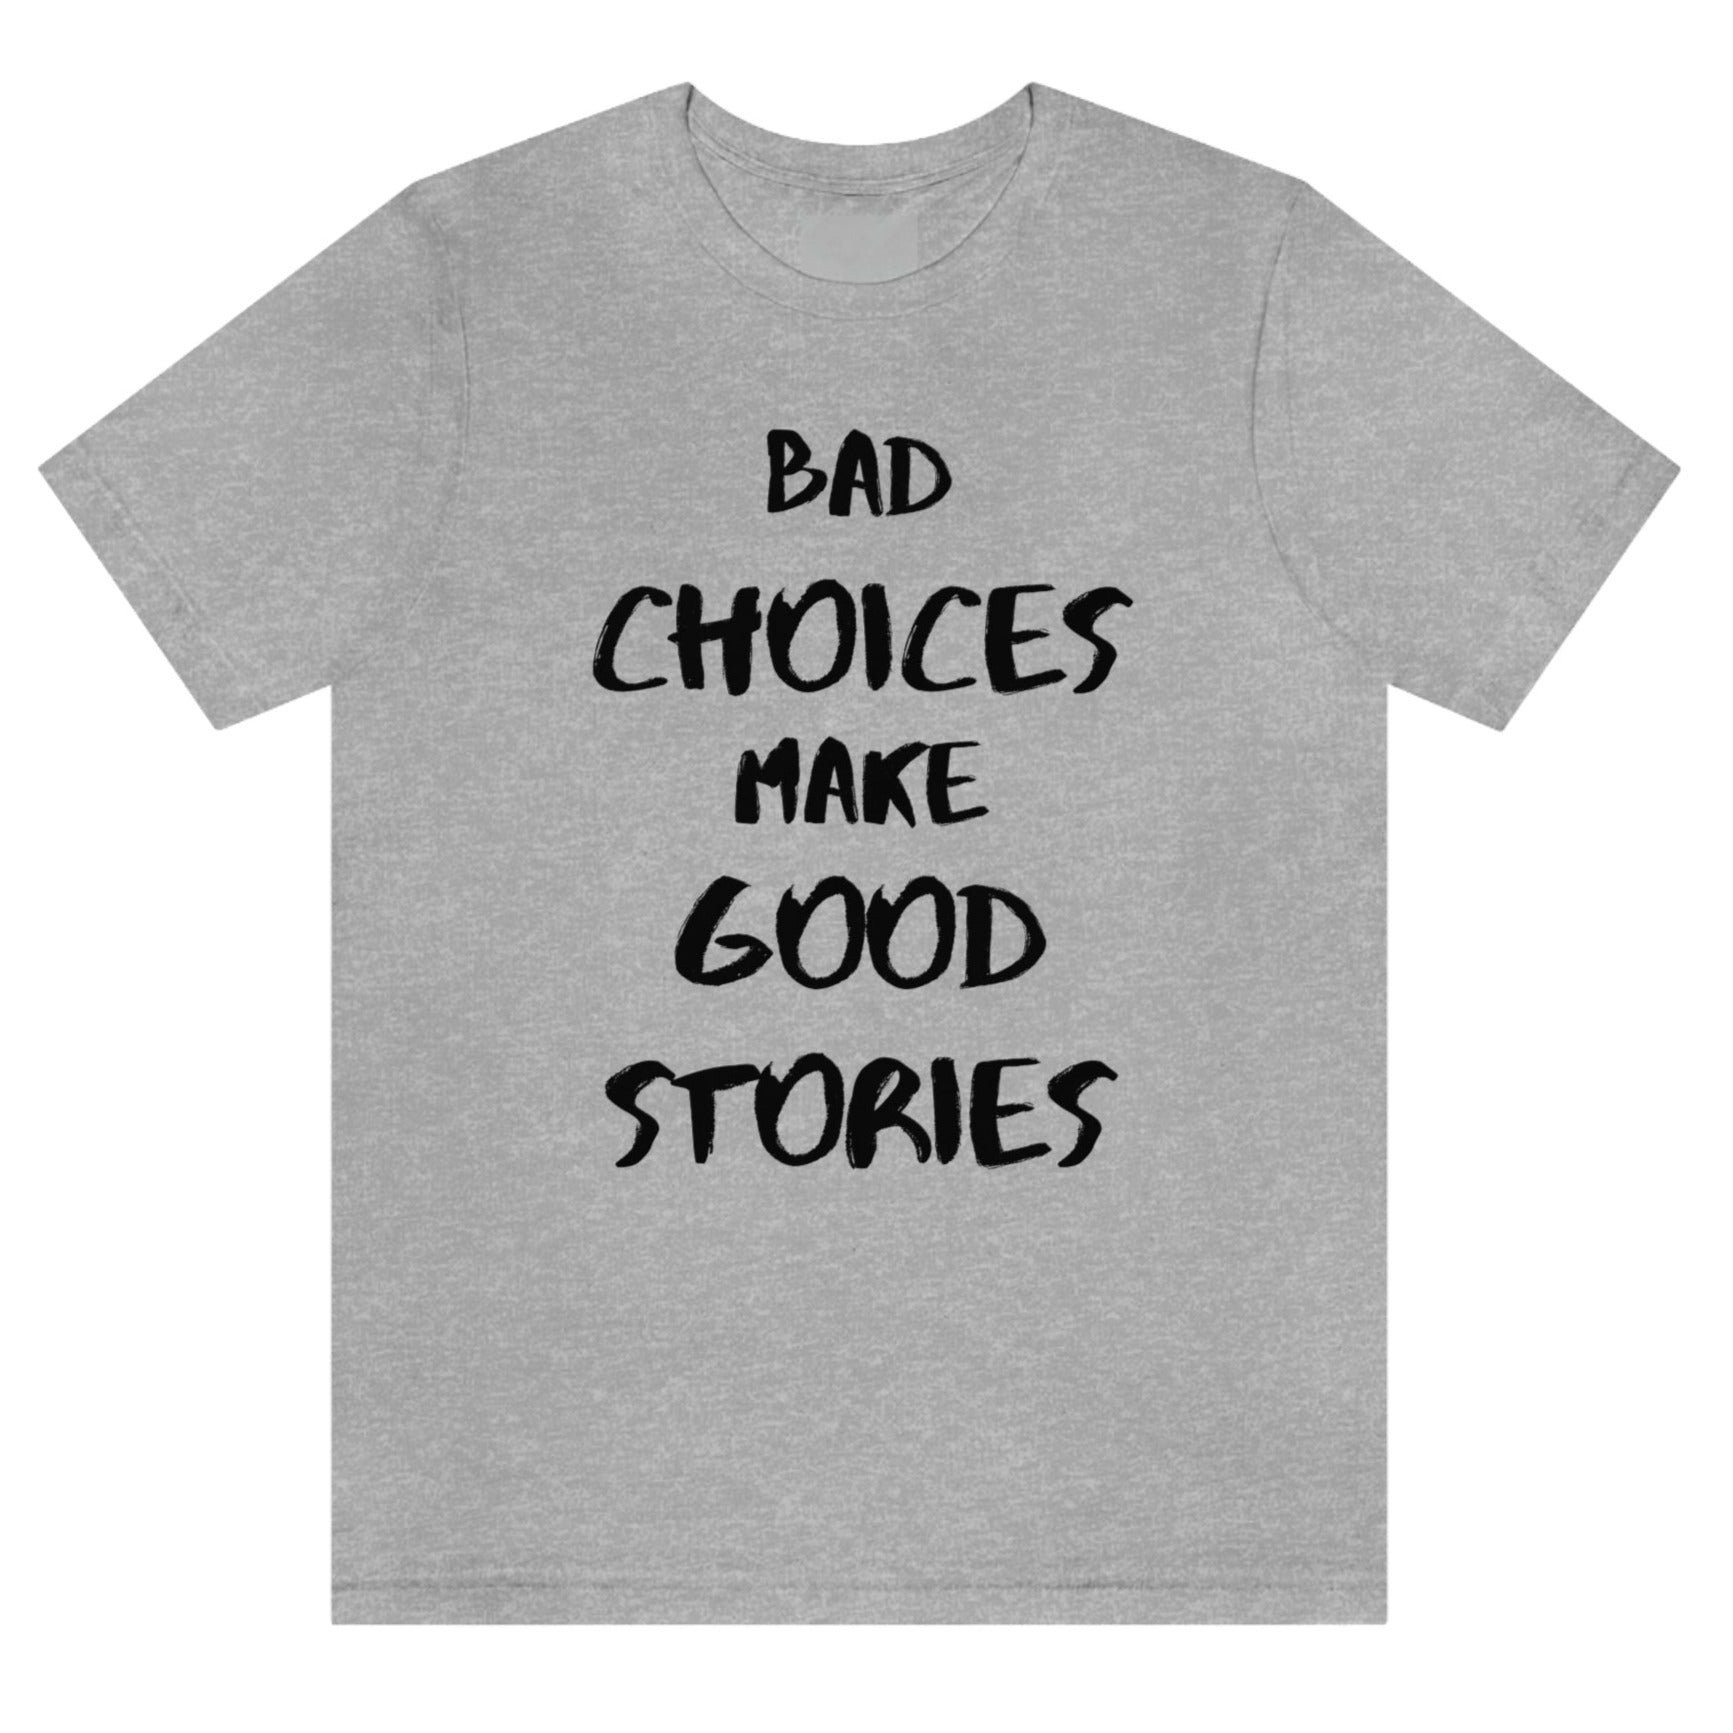     bad-choices-make-good-stories-athletic-heather-t-shirt-funny-unisex